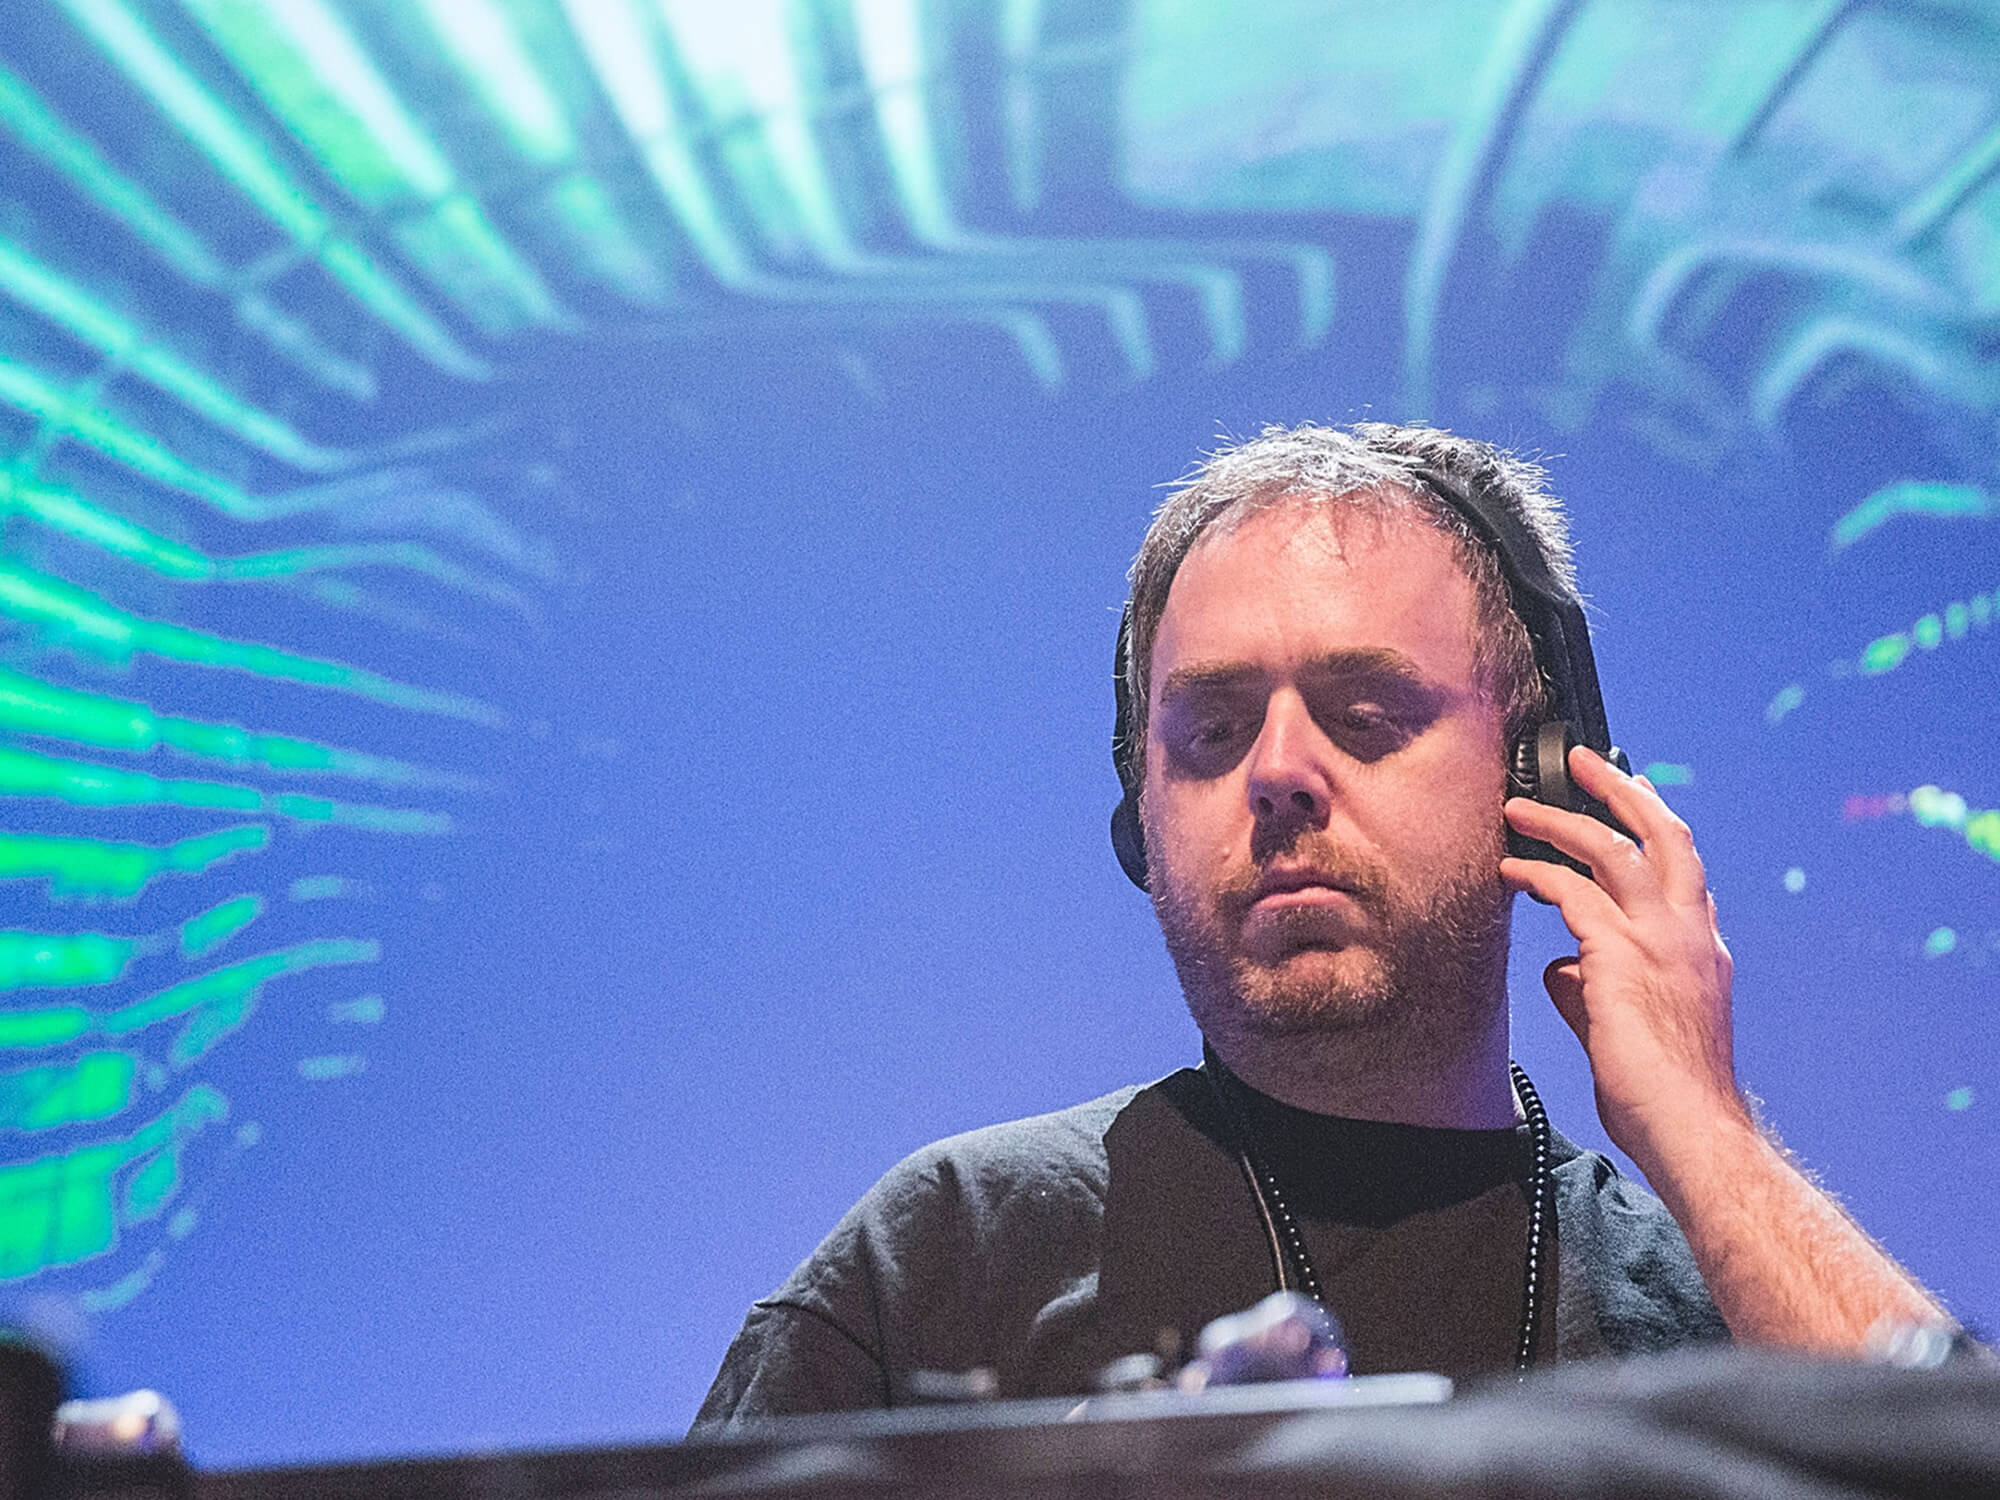 Cut Chemist performing in 2014, photo by Rick Kern/WireImage via Getty Images